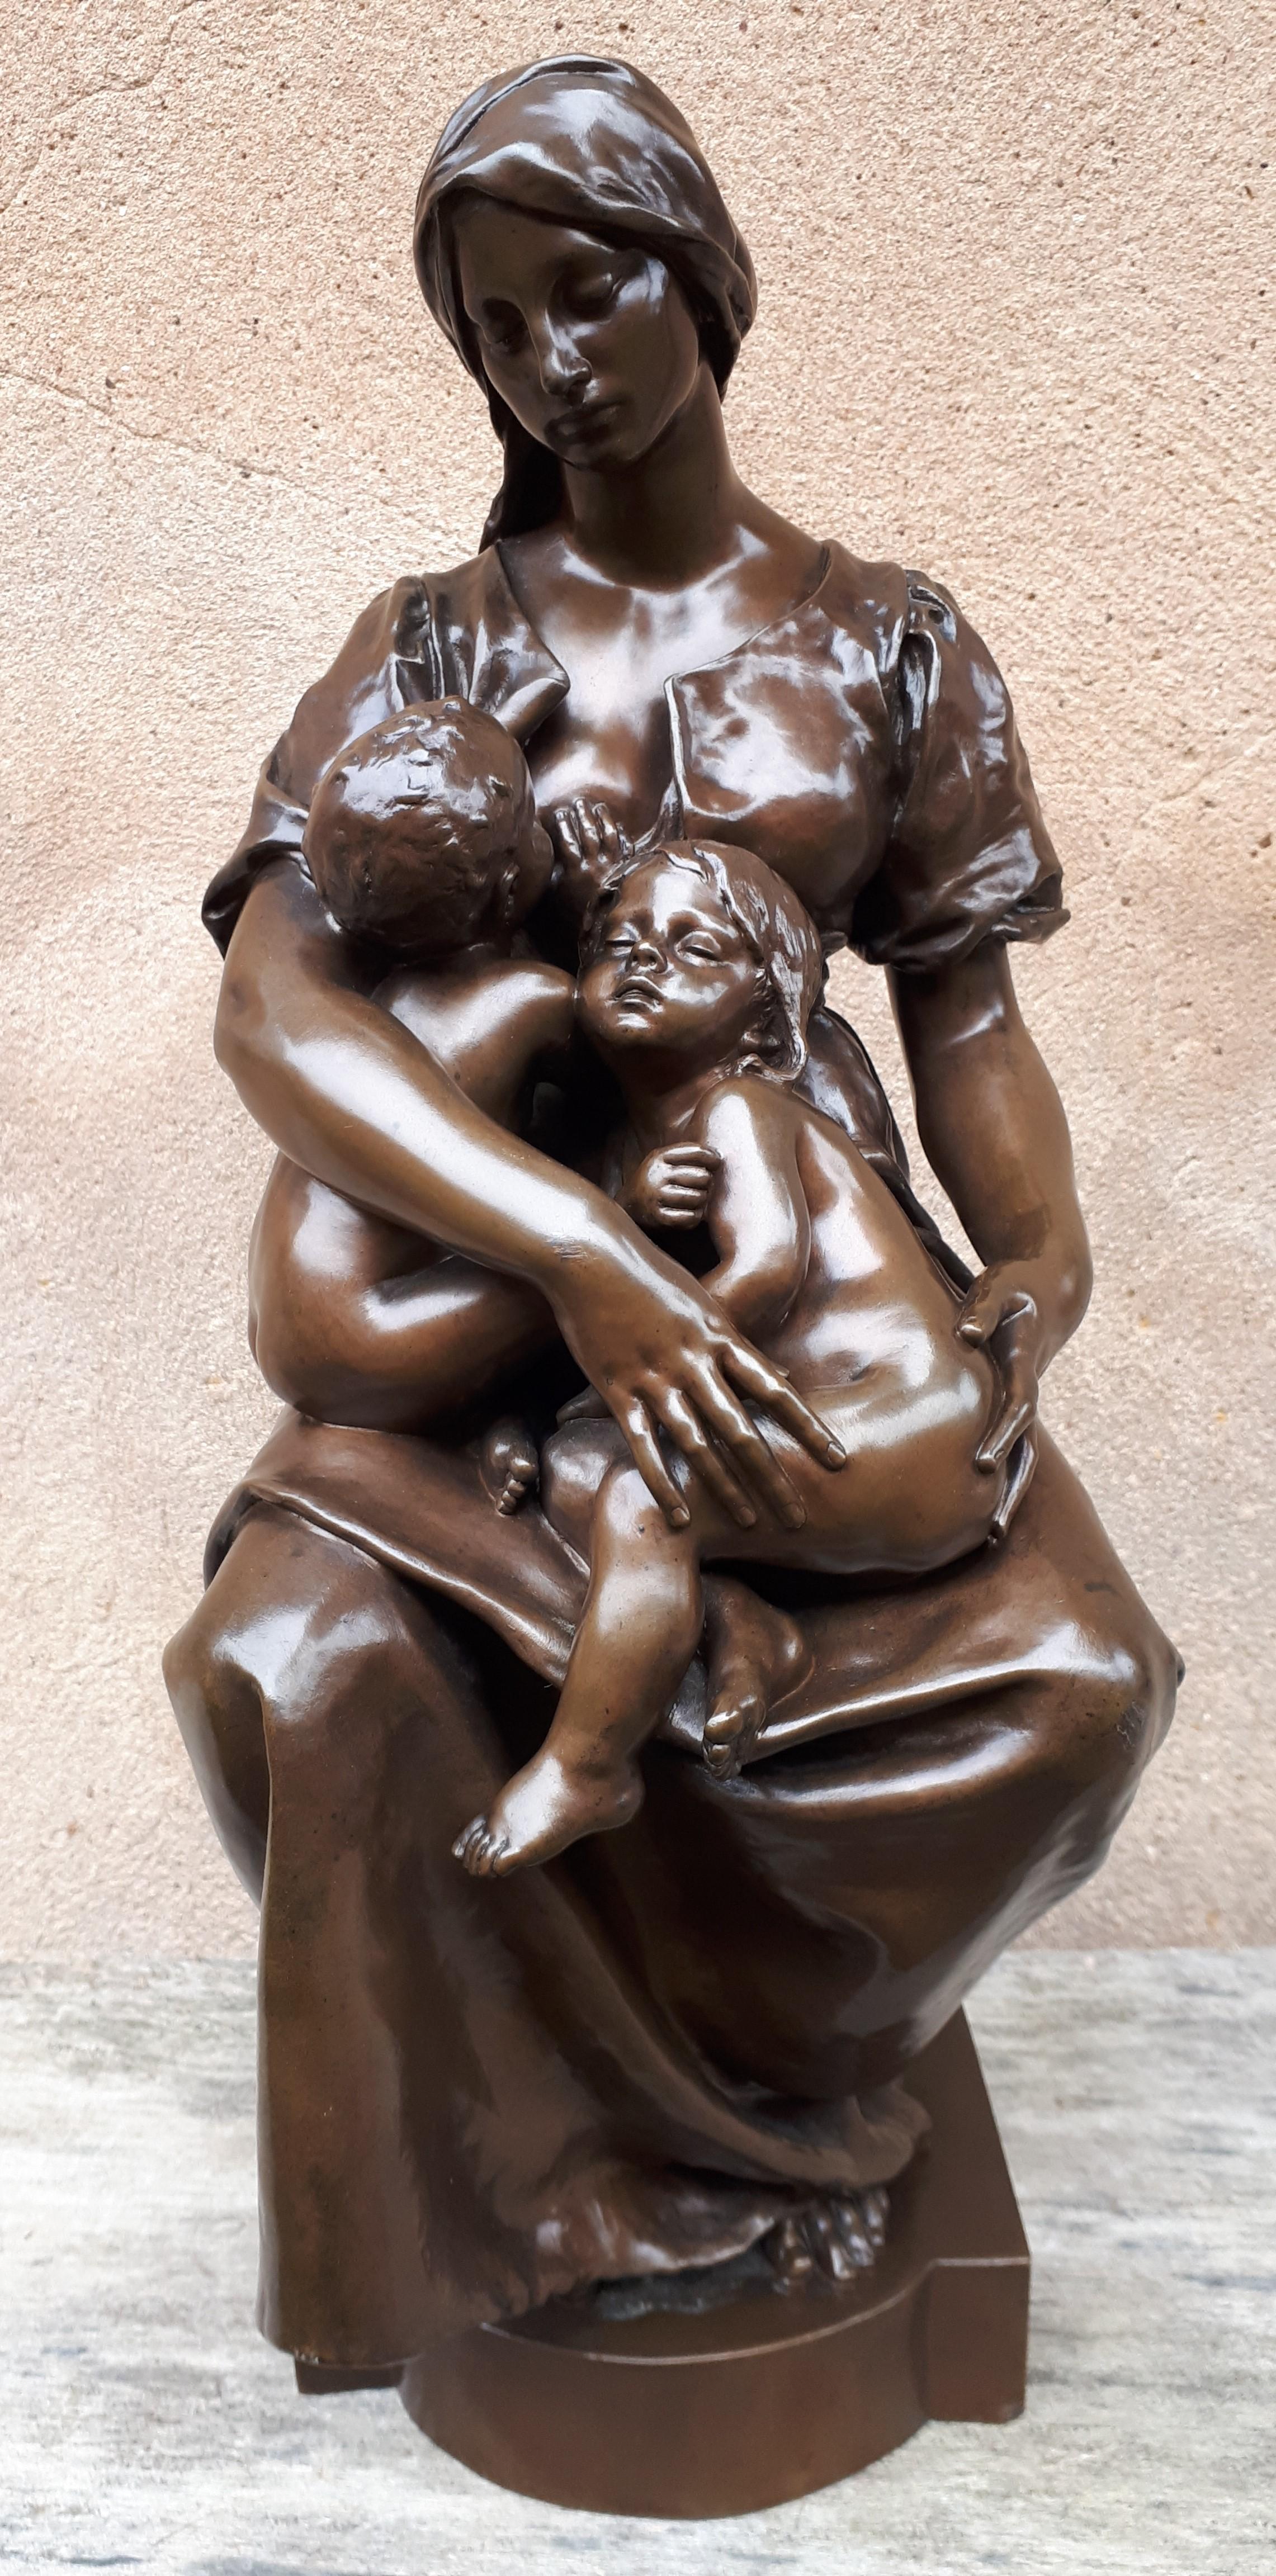 Magnificent composition for this bronze sculpture with brown patina. Charity (such is the name of the work) is represented here in the form of a young woman breastfeeding infants. Her lowered gaze and her hands delicately supporting the children